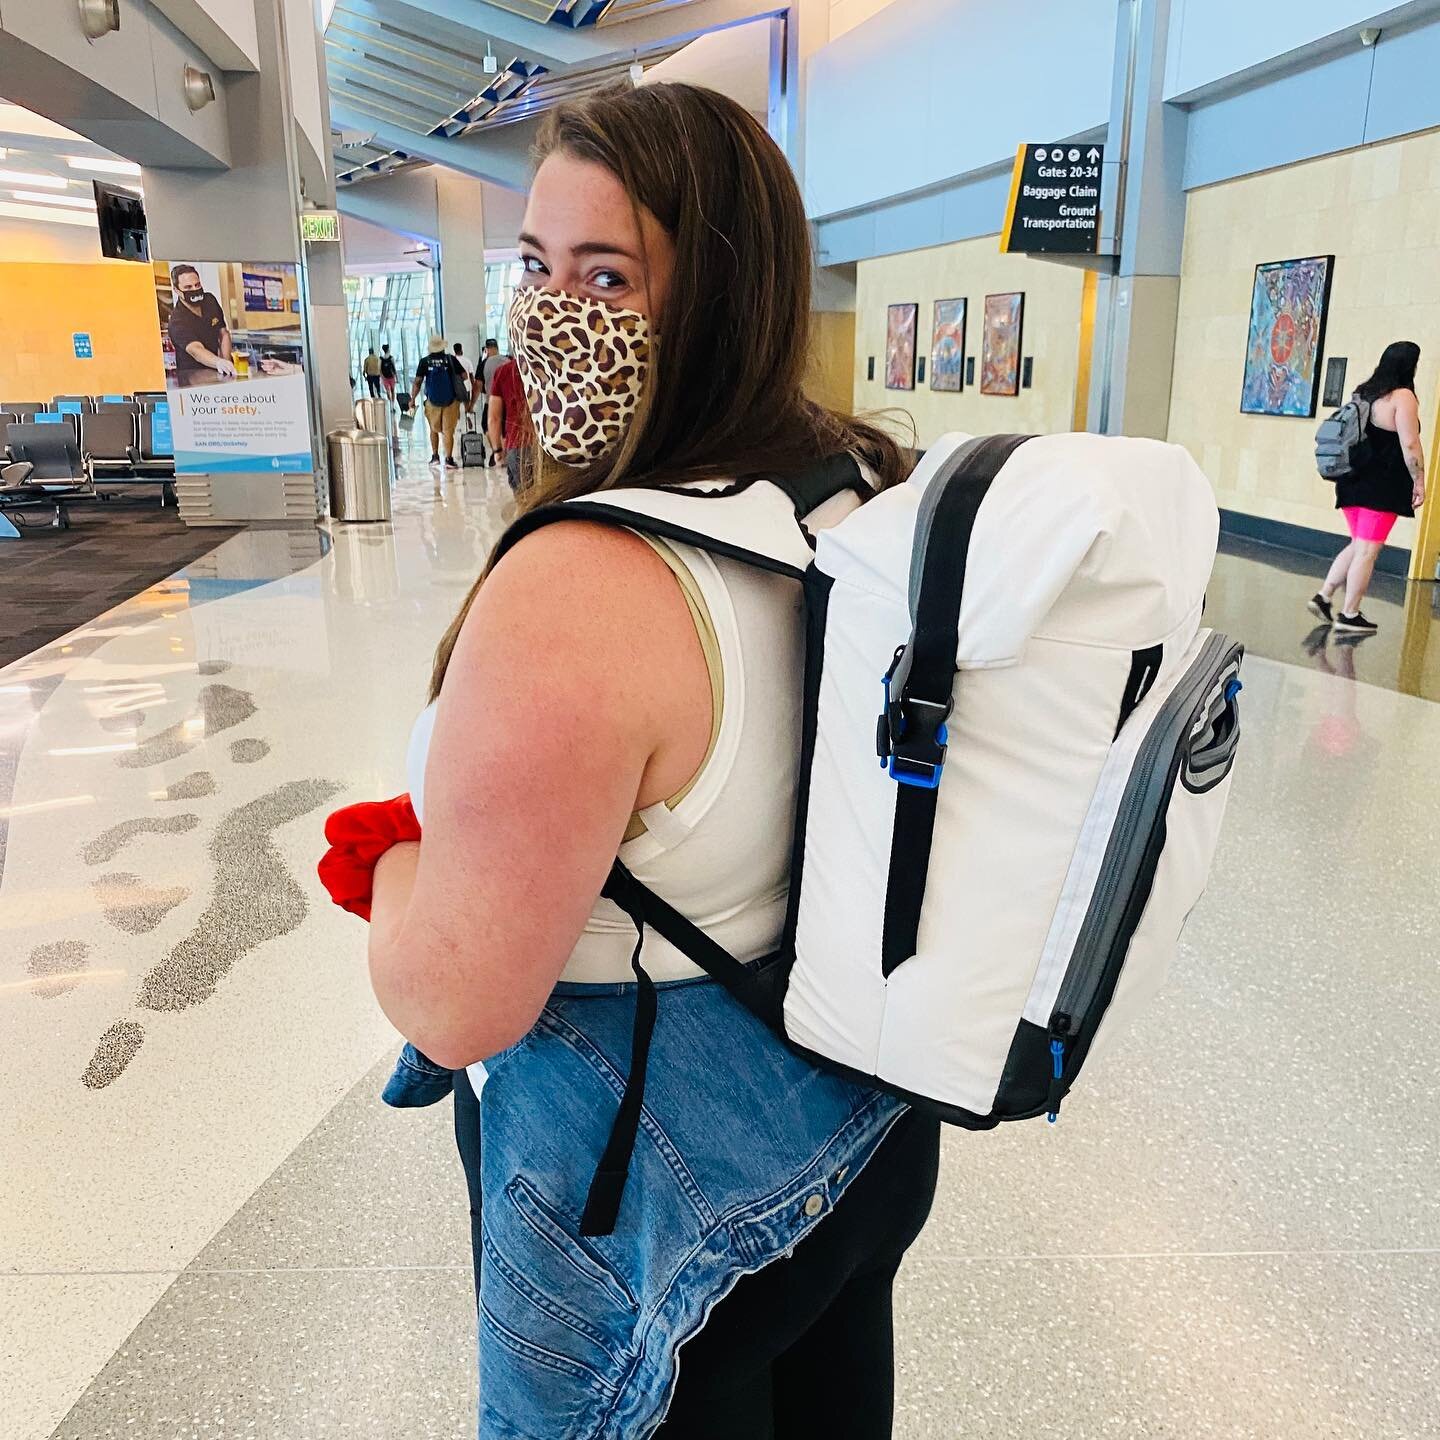 This entire backpack is filled with food. 

We&rsquo;re in route to San Diego for our very first family vacation AND I made a commitment to my wellness 10 days ago. I am committed to resetting my nutrition, getting in touch with what fuels me, and de